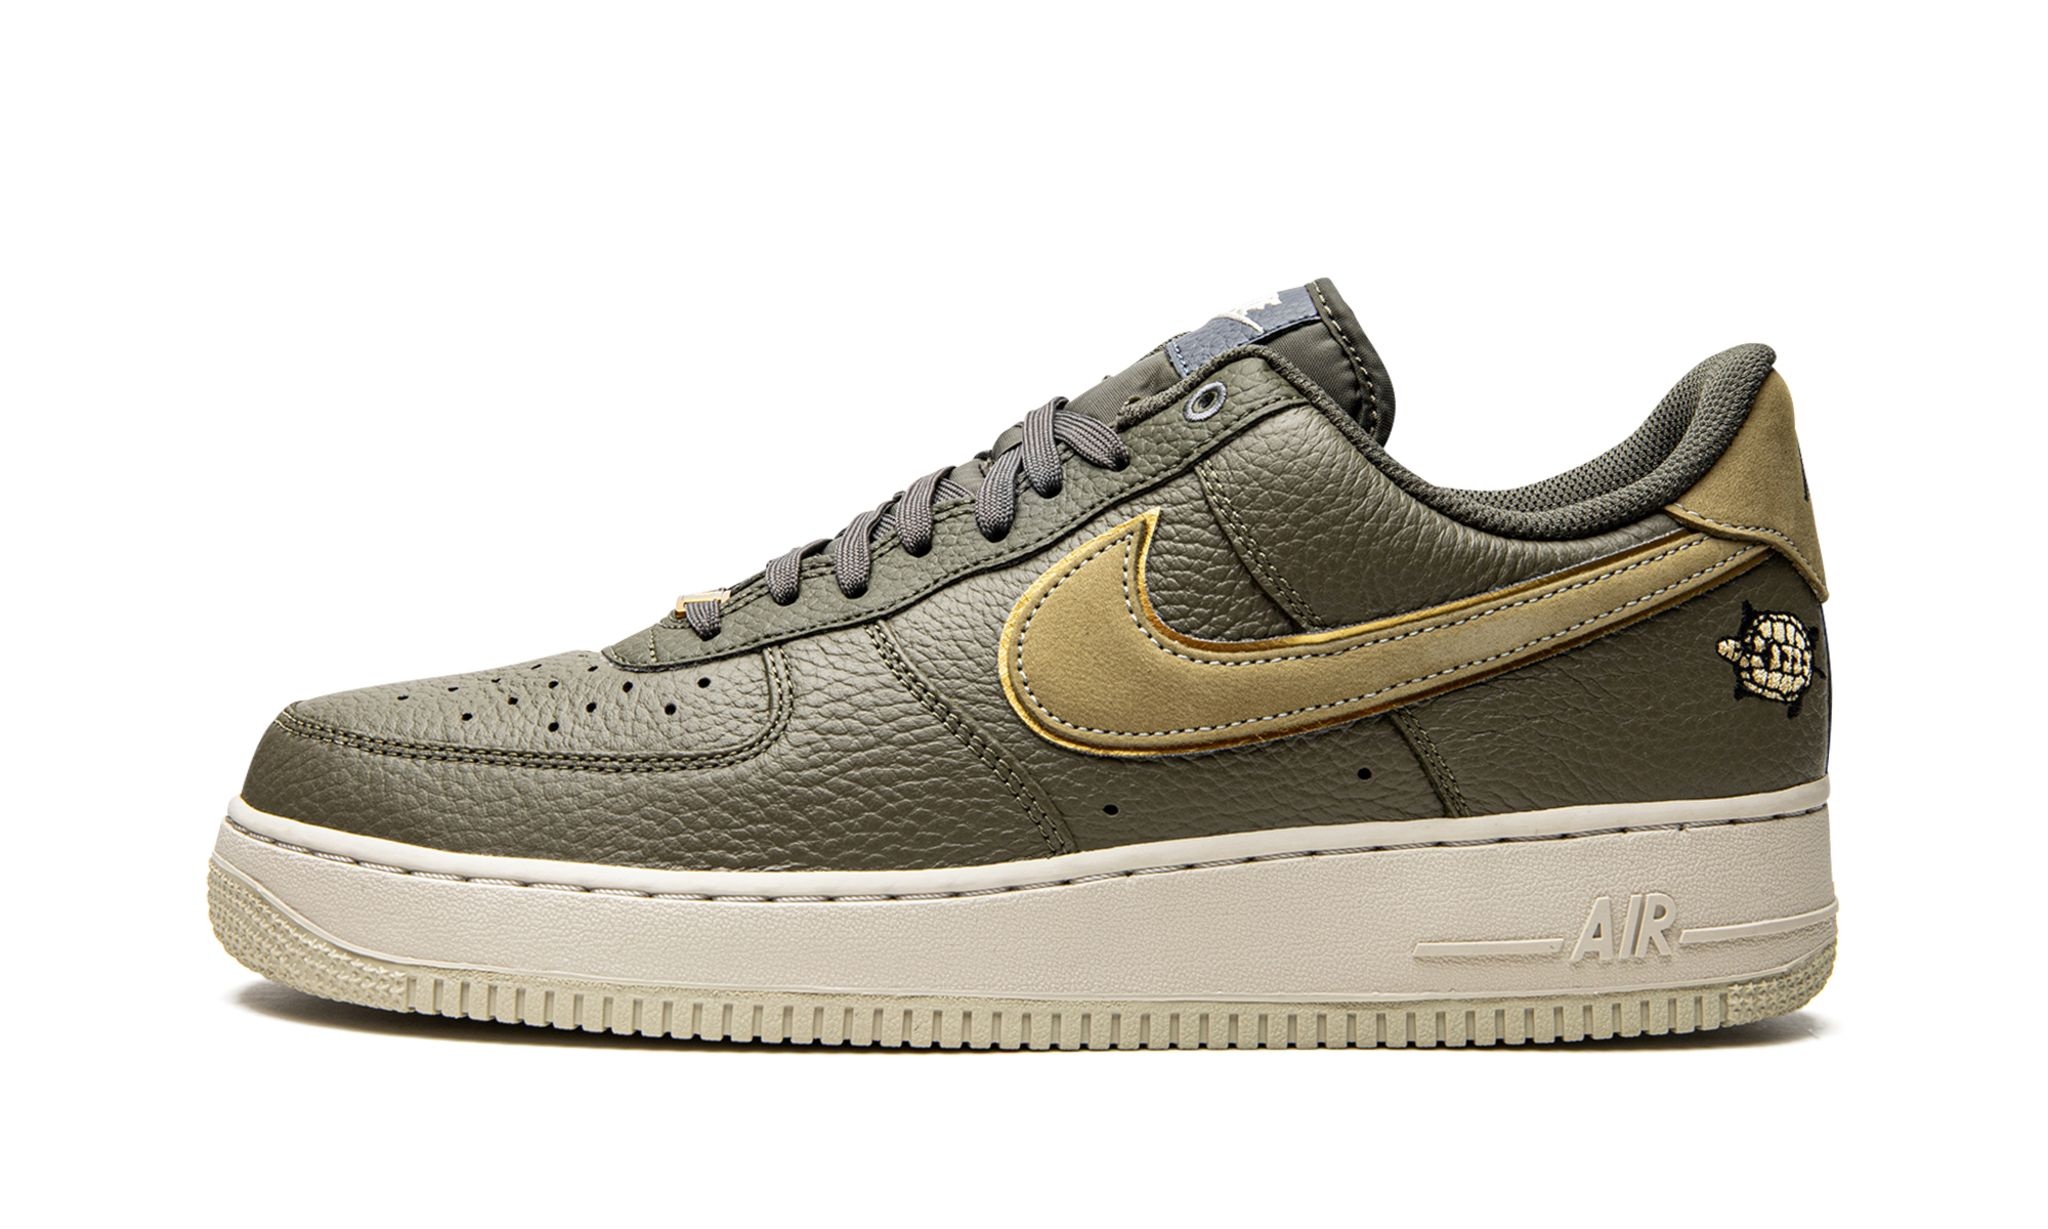 Air Force 1 '07 LX "Turtle" - 1